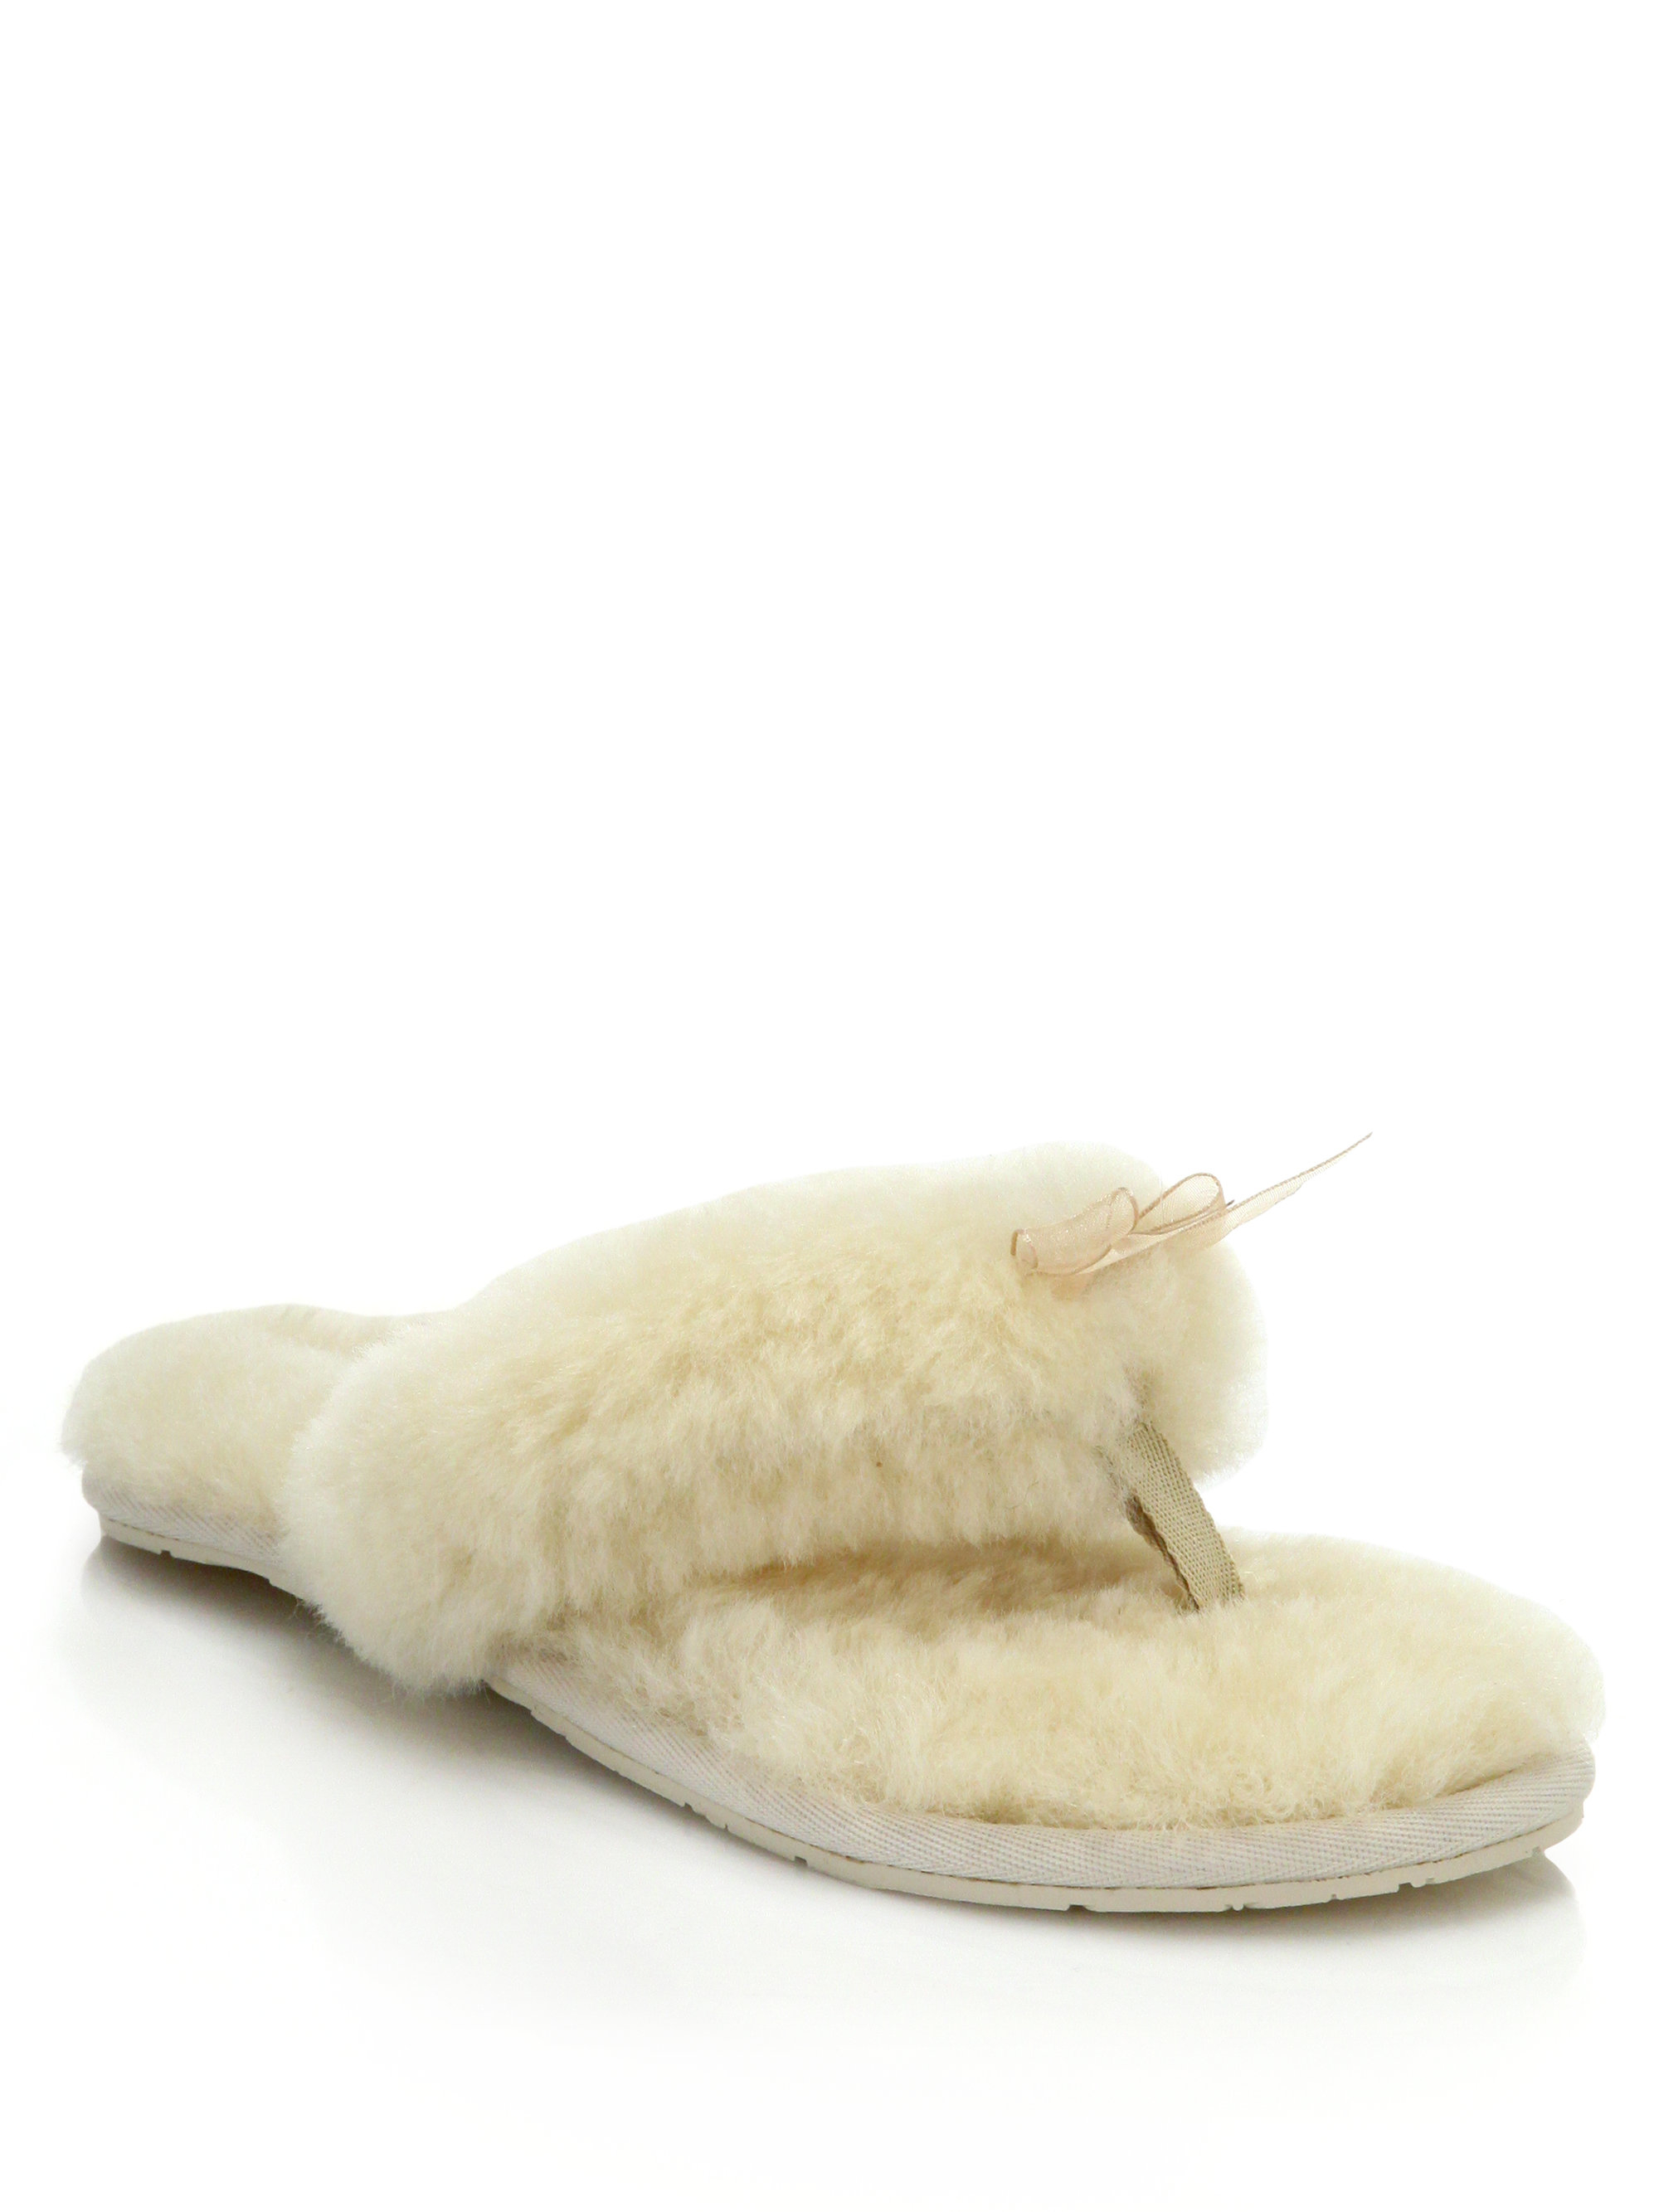 ugg thong slippers